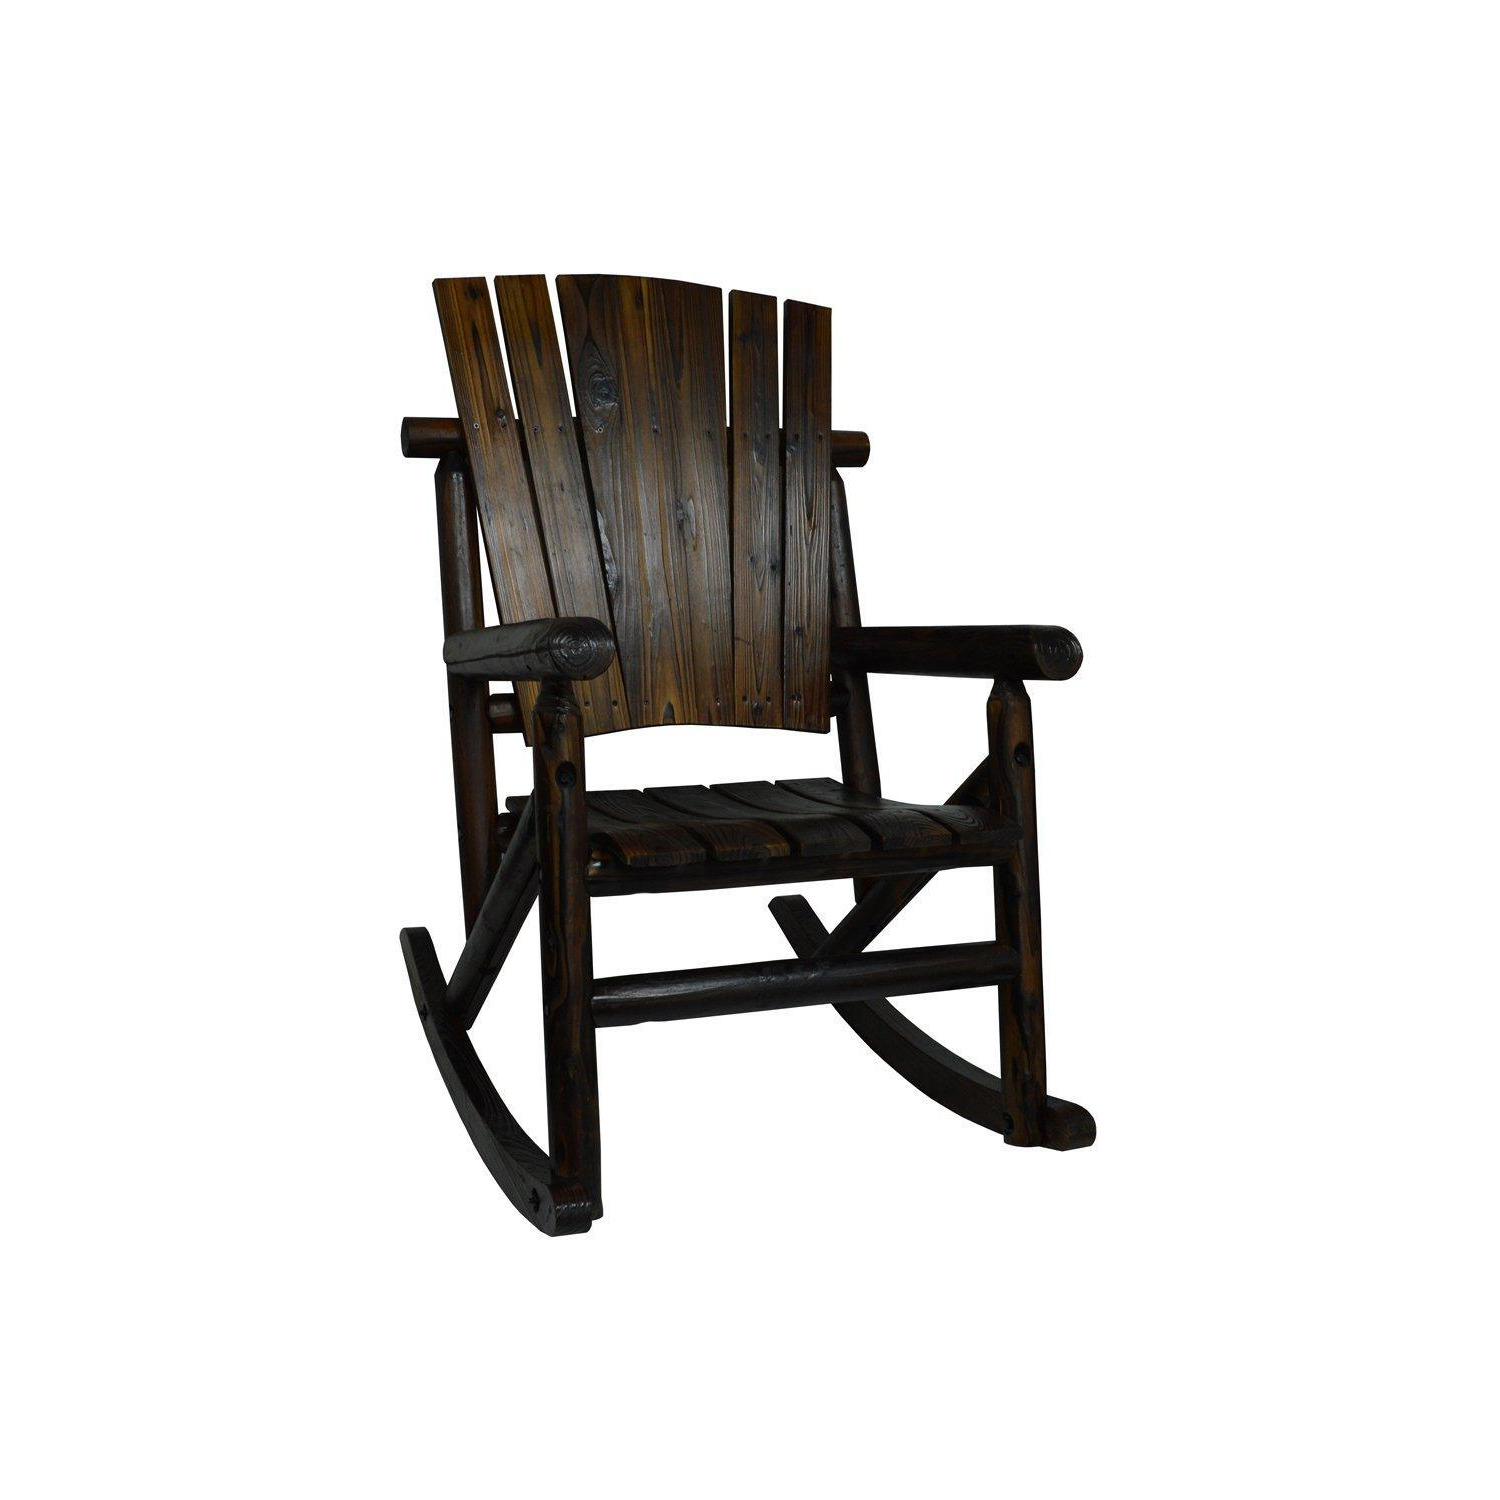 Watsons - Large Outdoor Rocking Chair - Burntwood - image 1